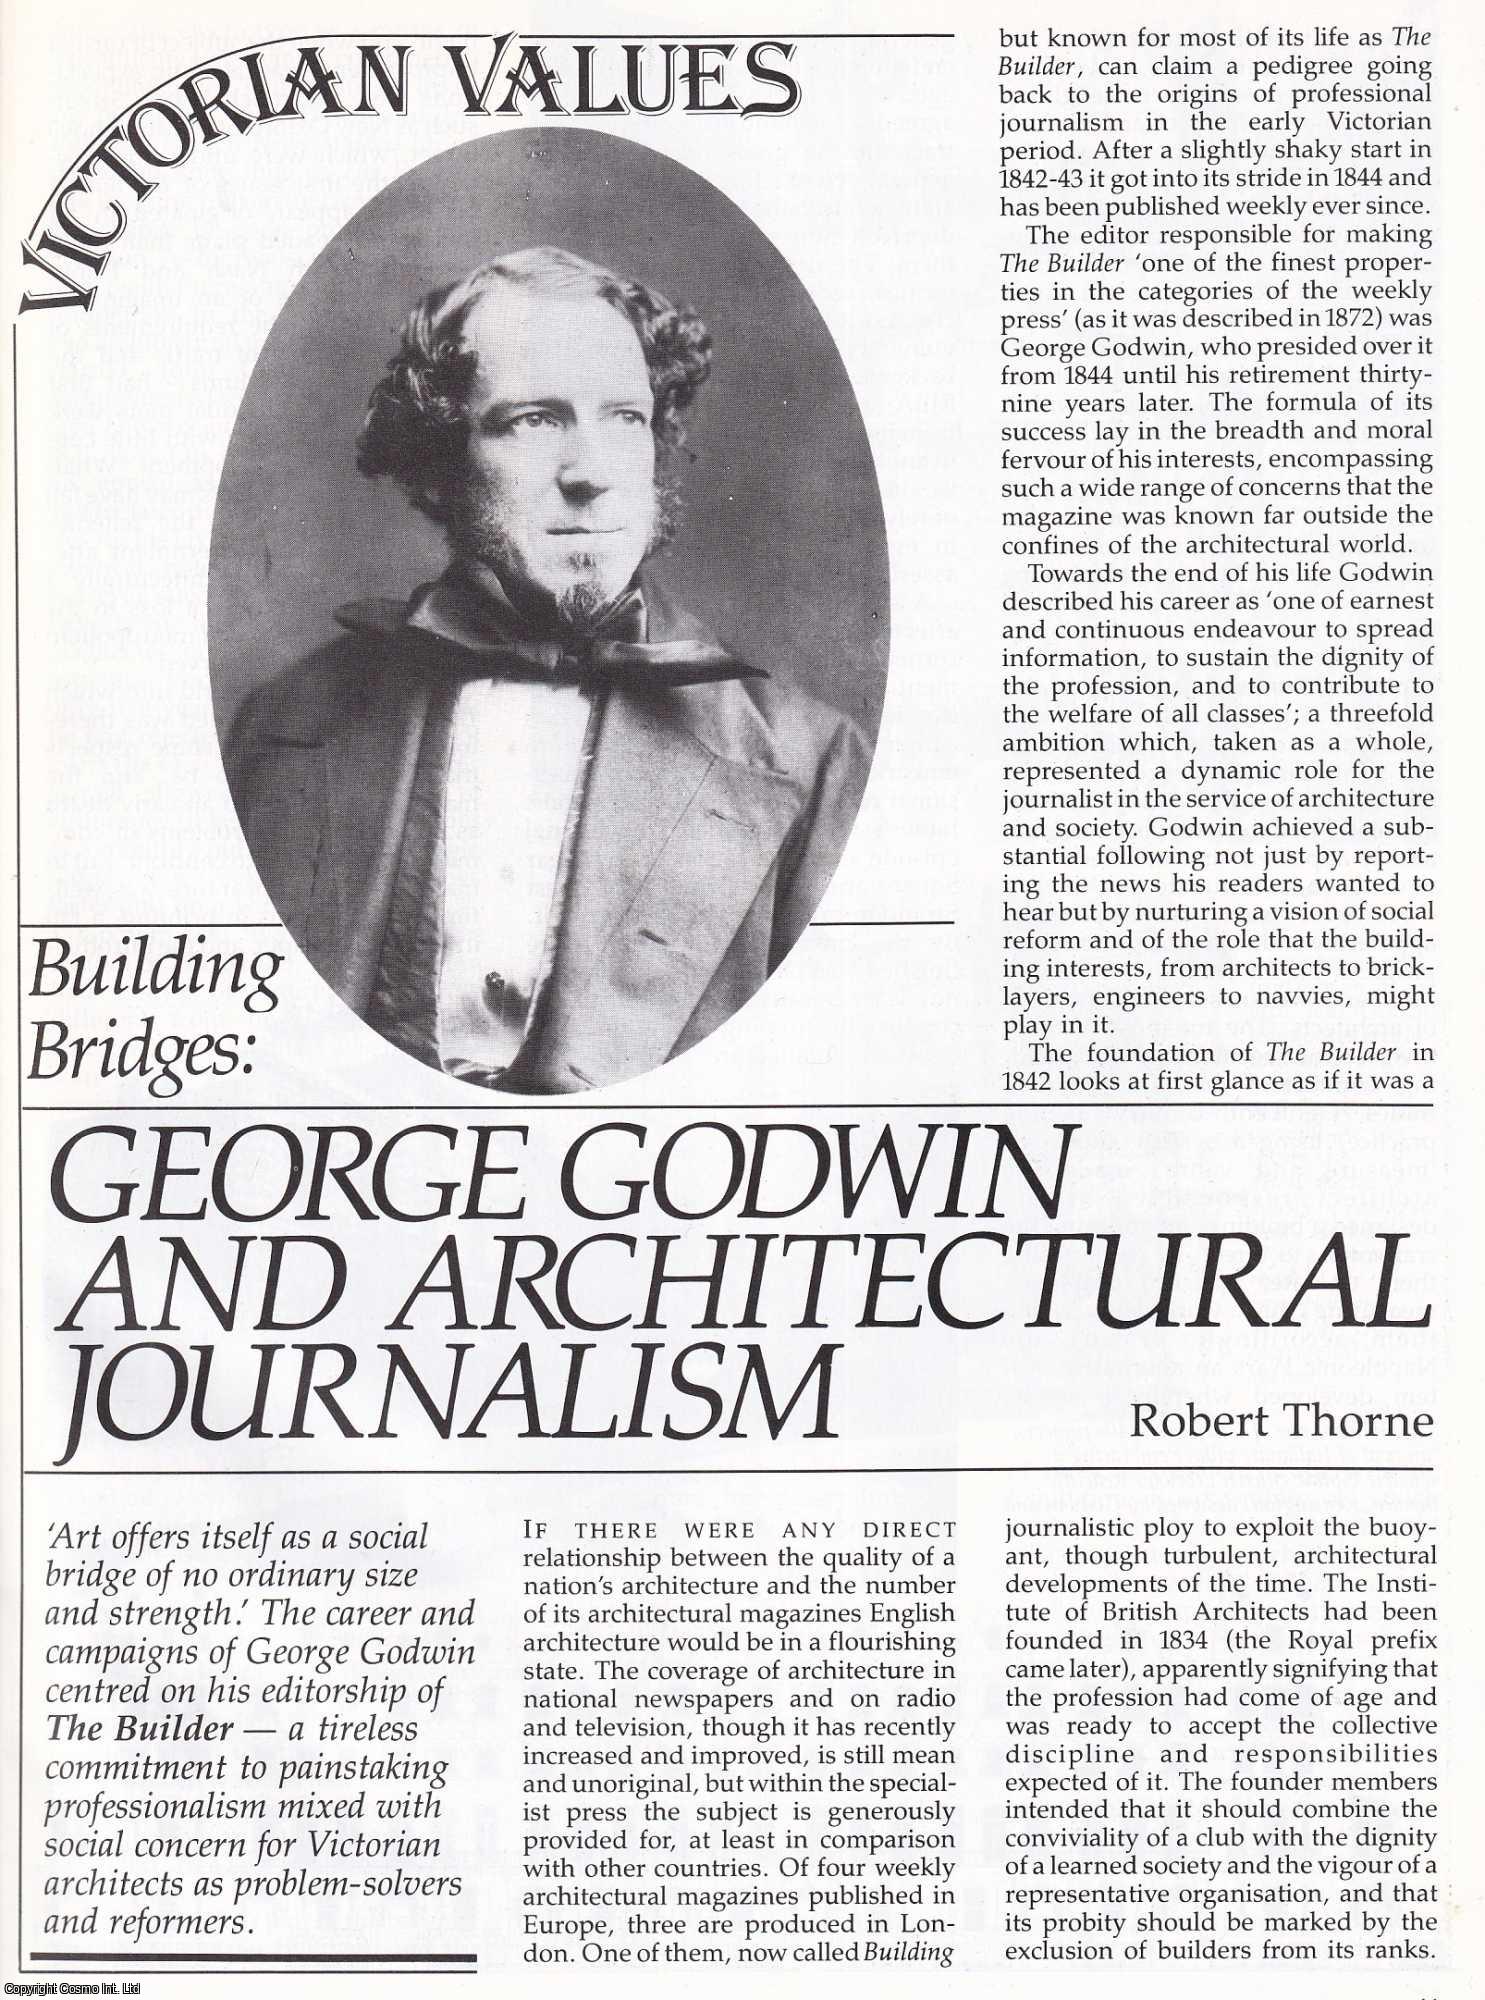 Robert Thorne - George Godwin & Architectural Journalism : Building Bridges. An original article from the History Today Magazine, 1987.